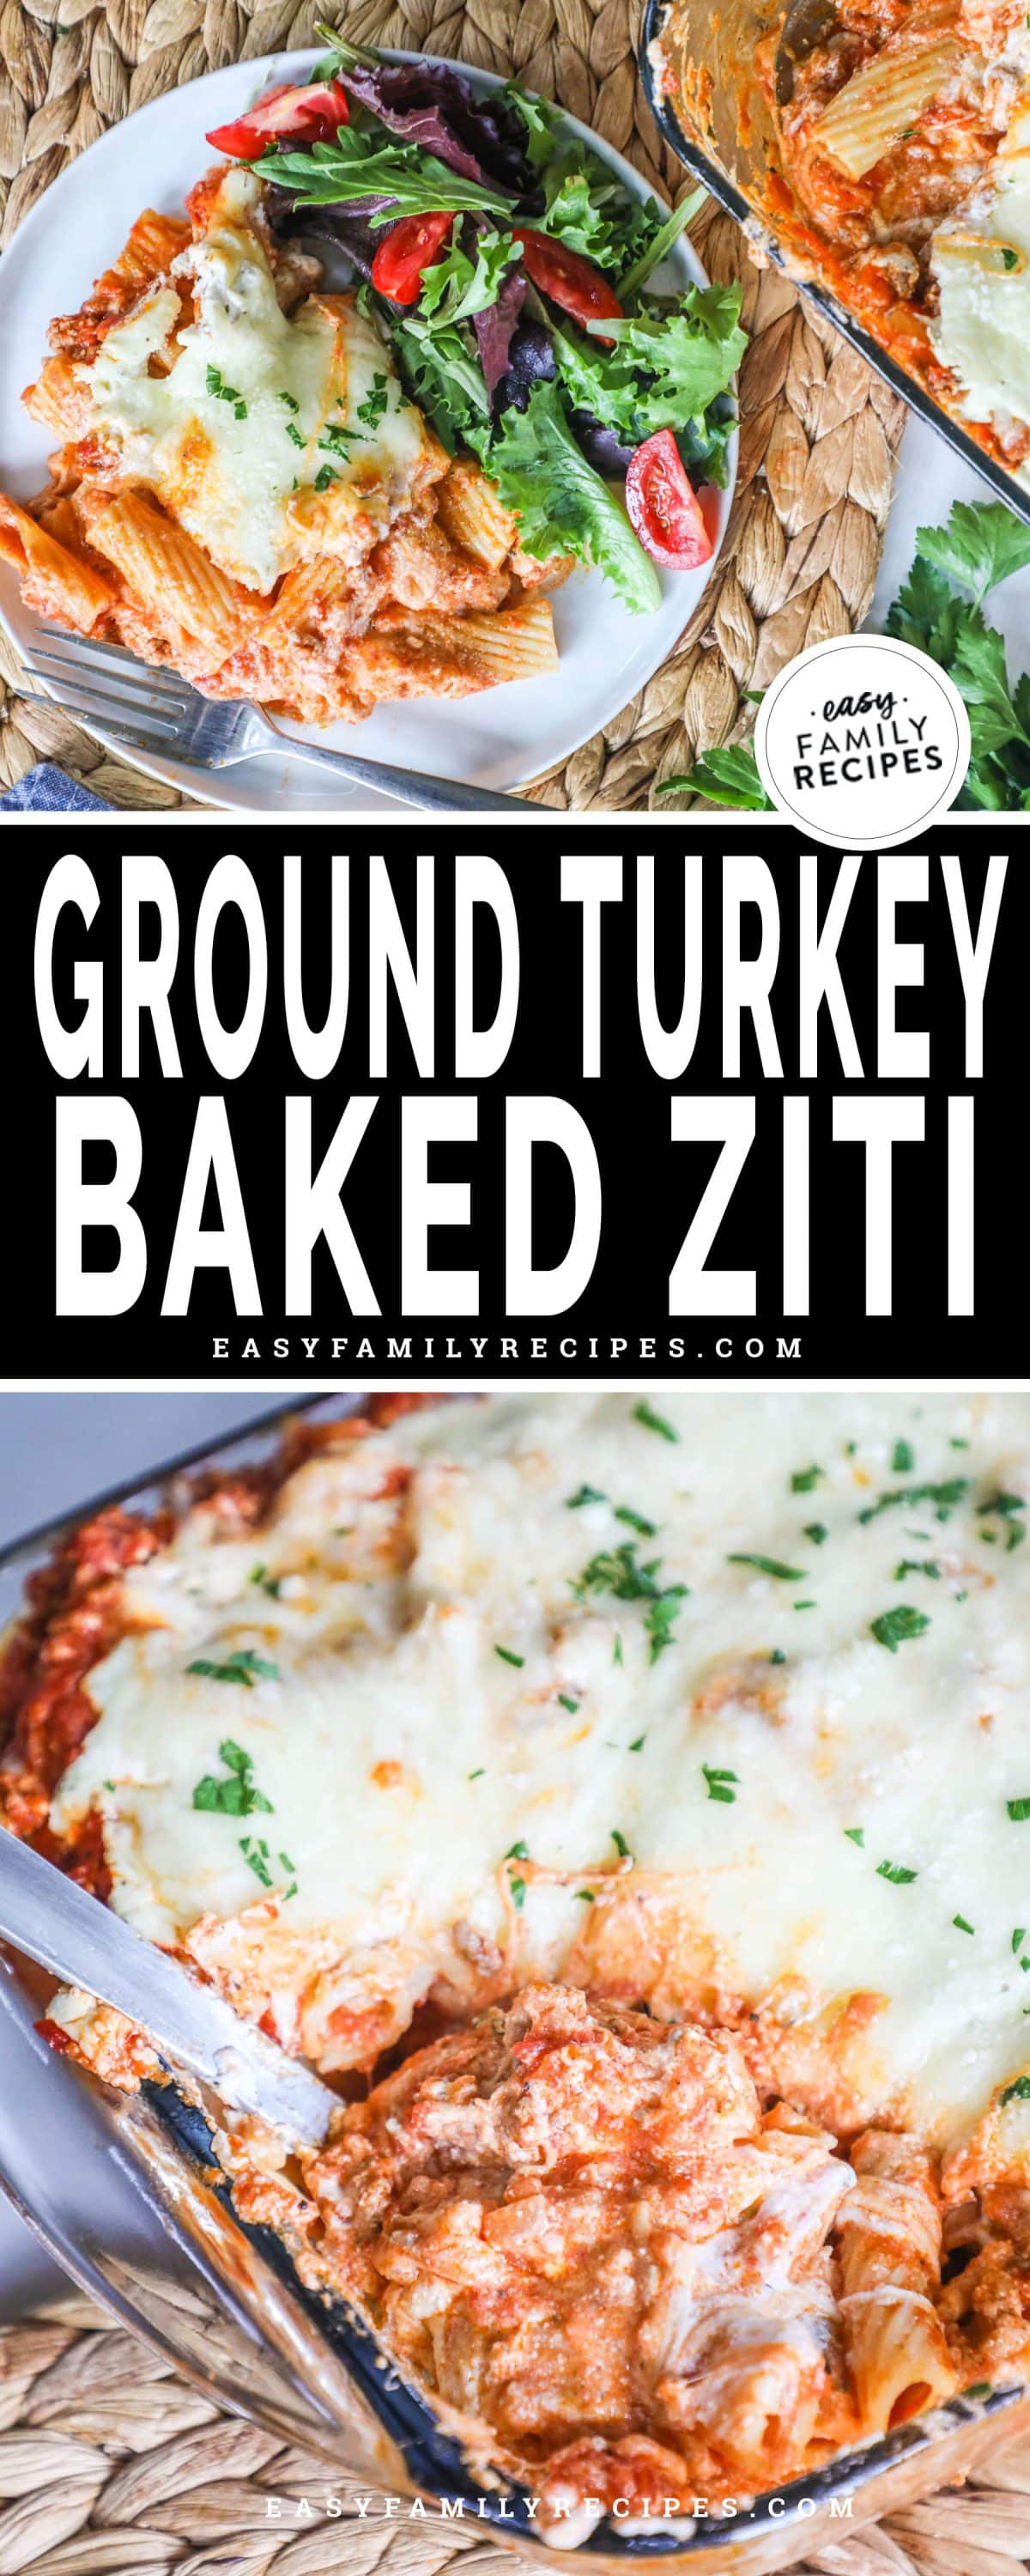 saucy and cheesy ground turkey baked ziti served with a green salad